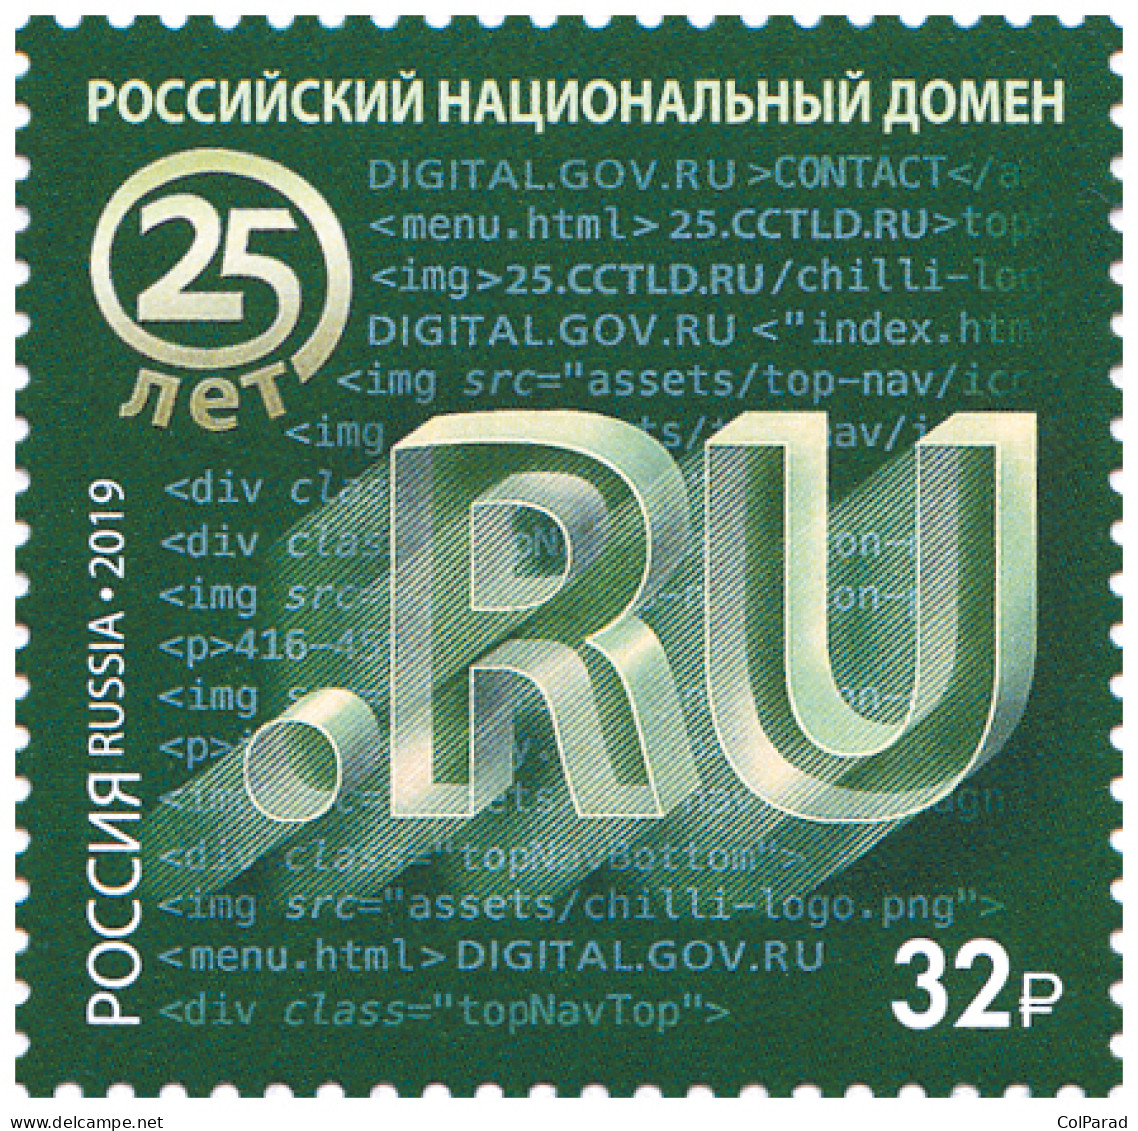 RUSSIA - 2019 -  STAMP MNH ** - National Domain In Russia “.RU” - Unused Stamps